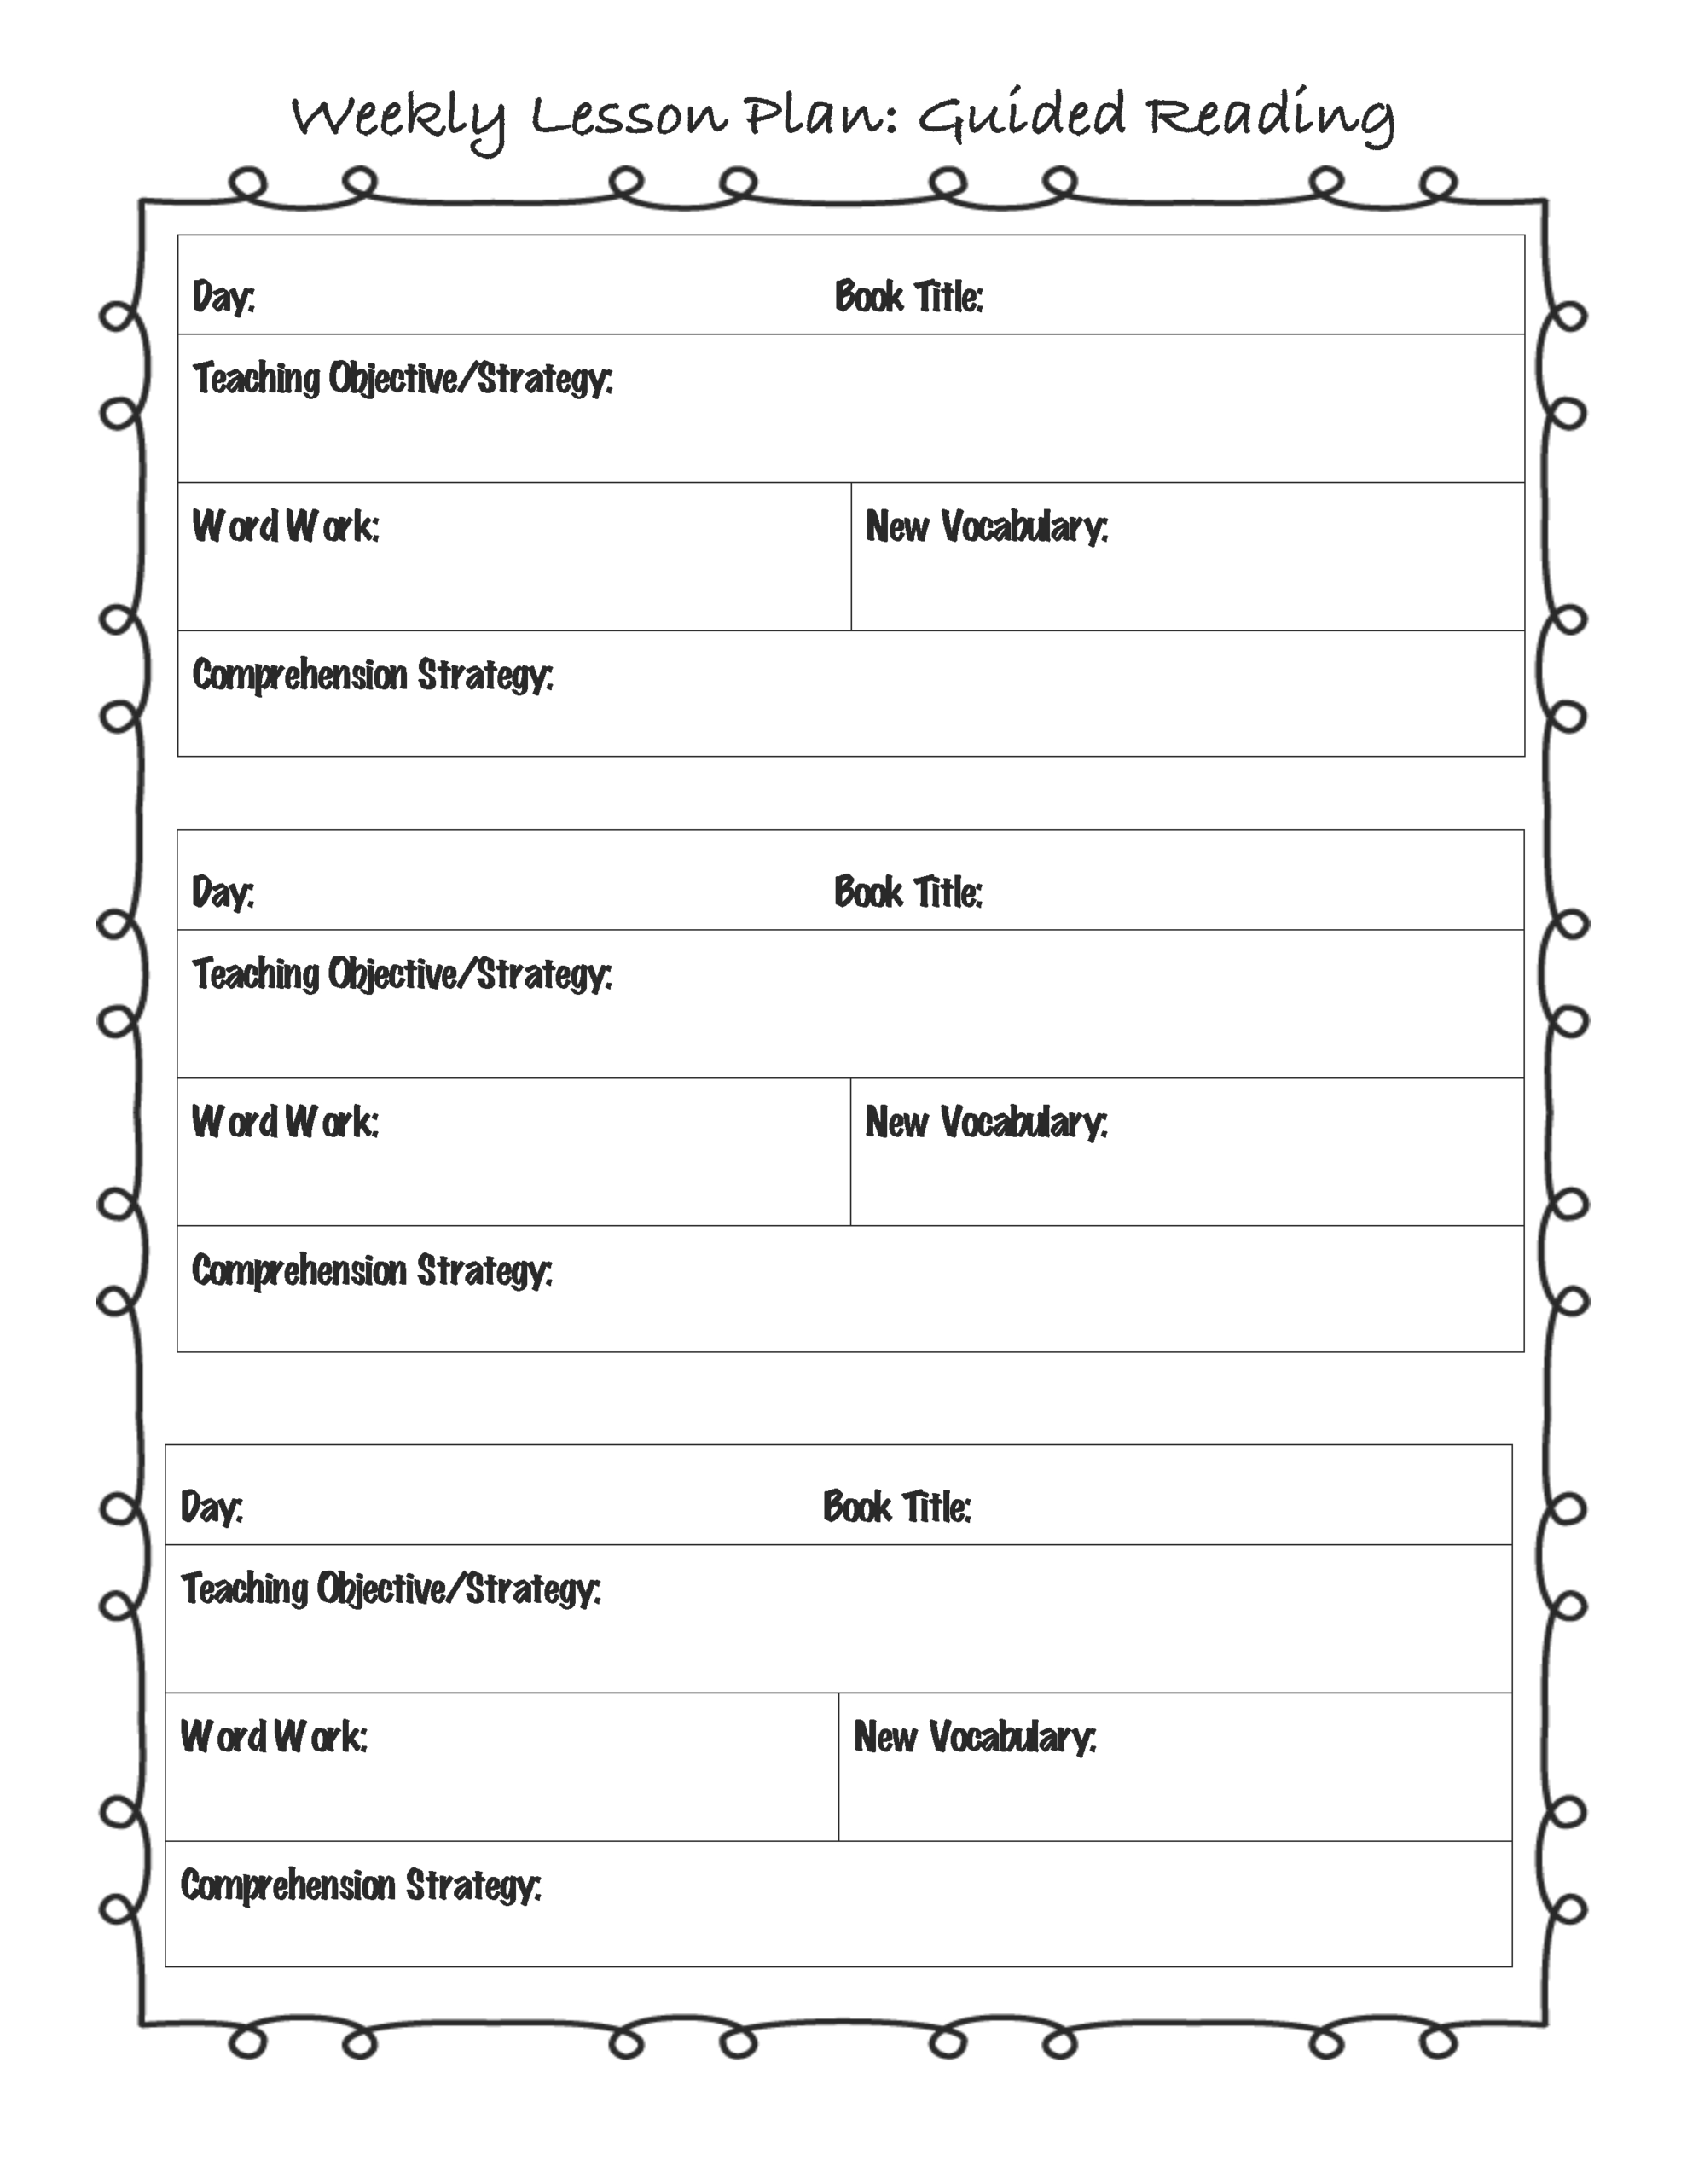 Lesson Plan Template | Weekly Guided Reading Lesson Plan For Teacher Plan Book Template Word